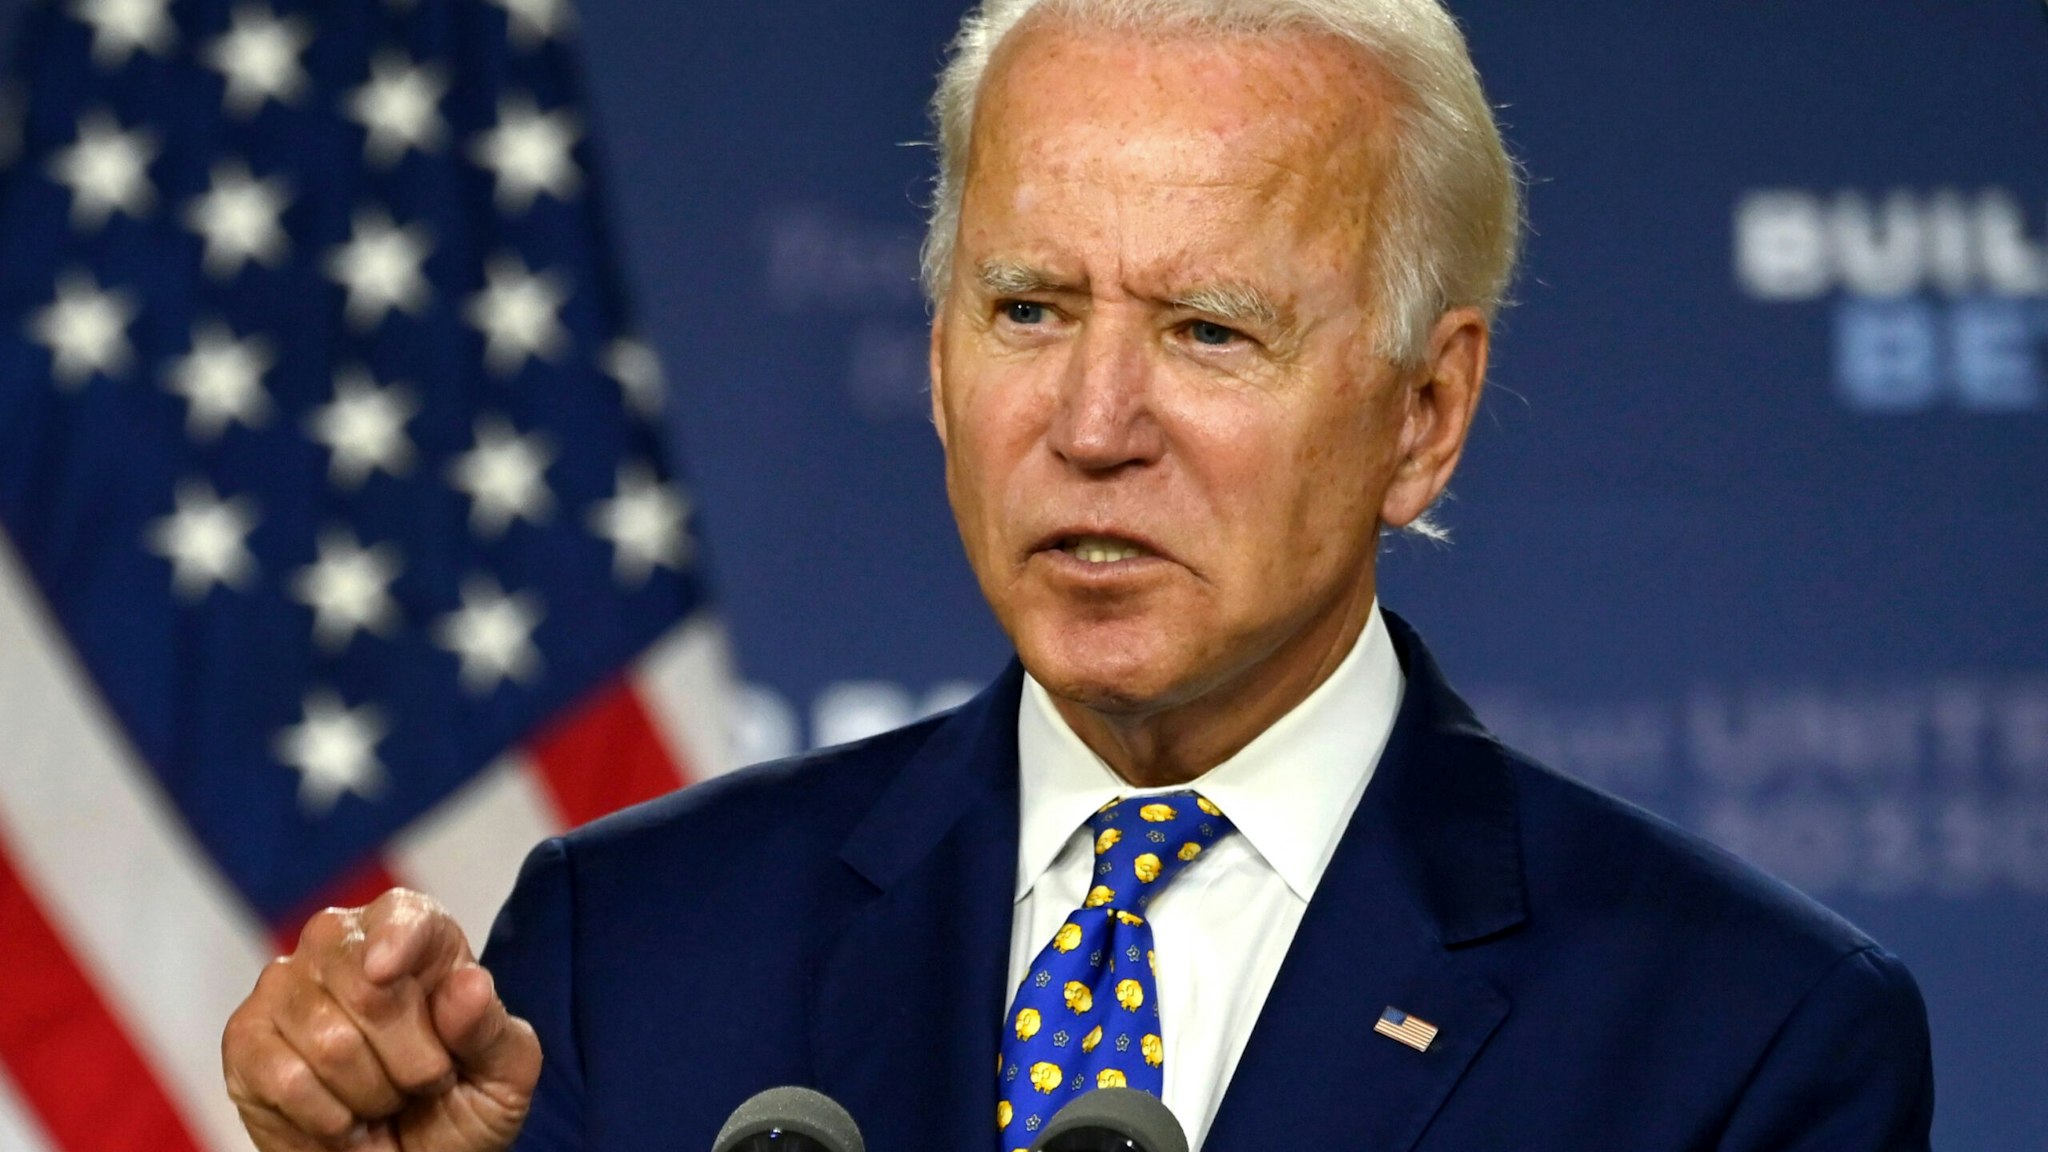 US Democratic presidential candidate and former Vice President Joe Biden speaks during a campaign event at the William "Hicks" Anderson Community Center in Wilmington, Delaware on July 28, 2020.